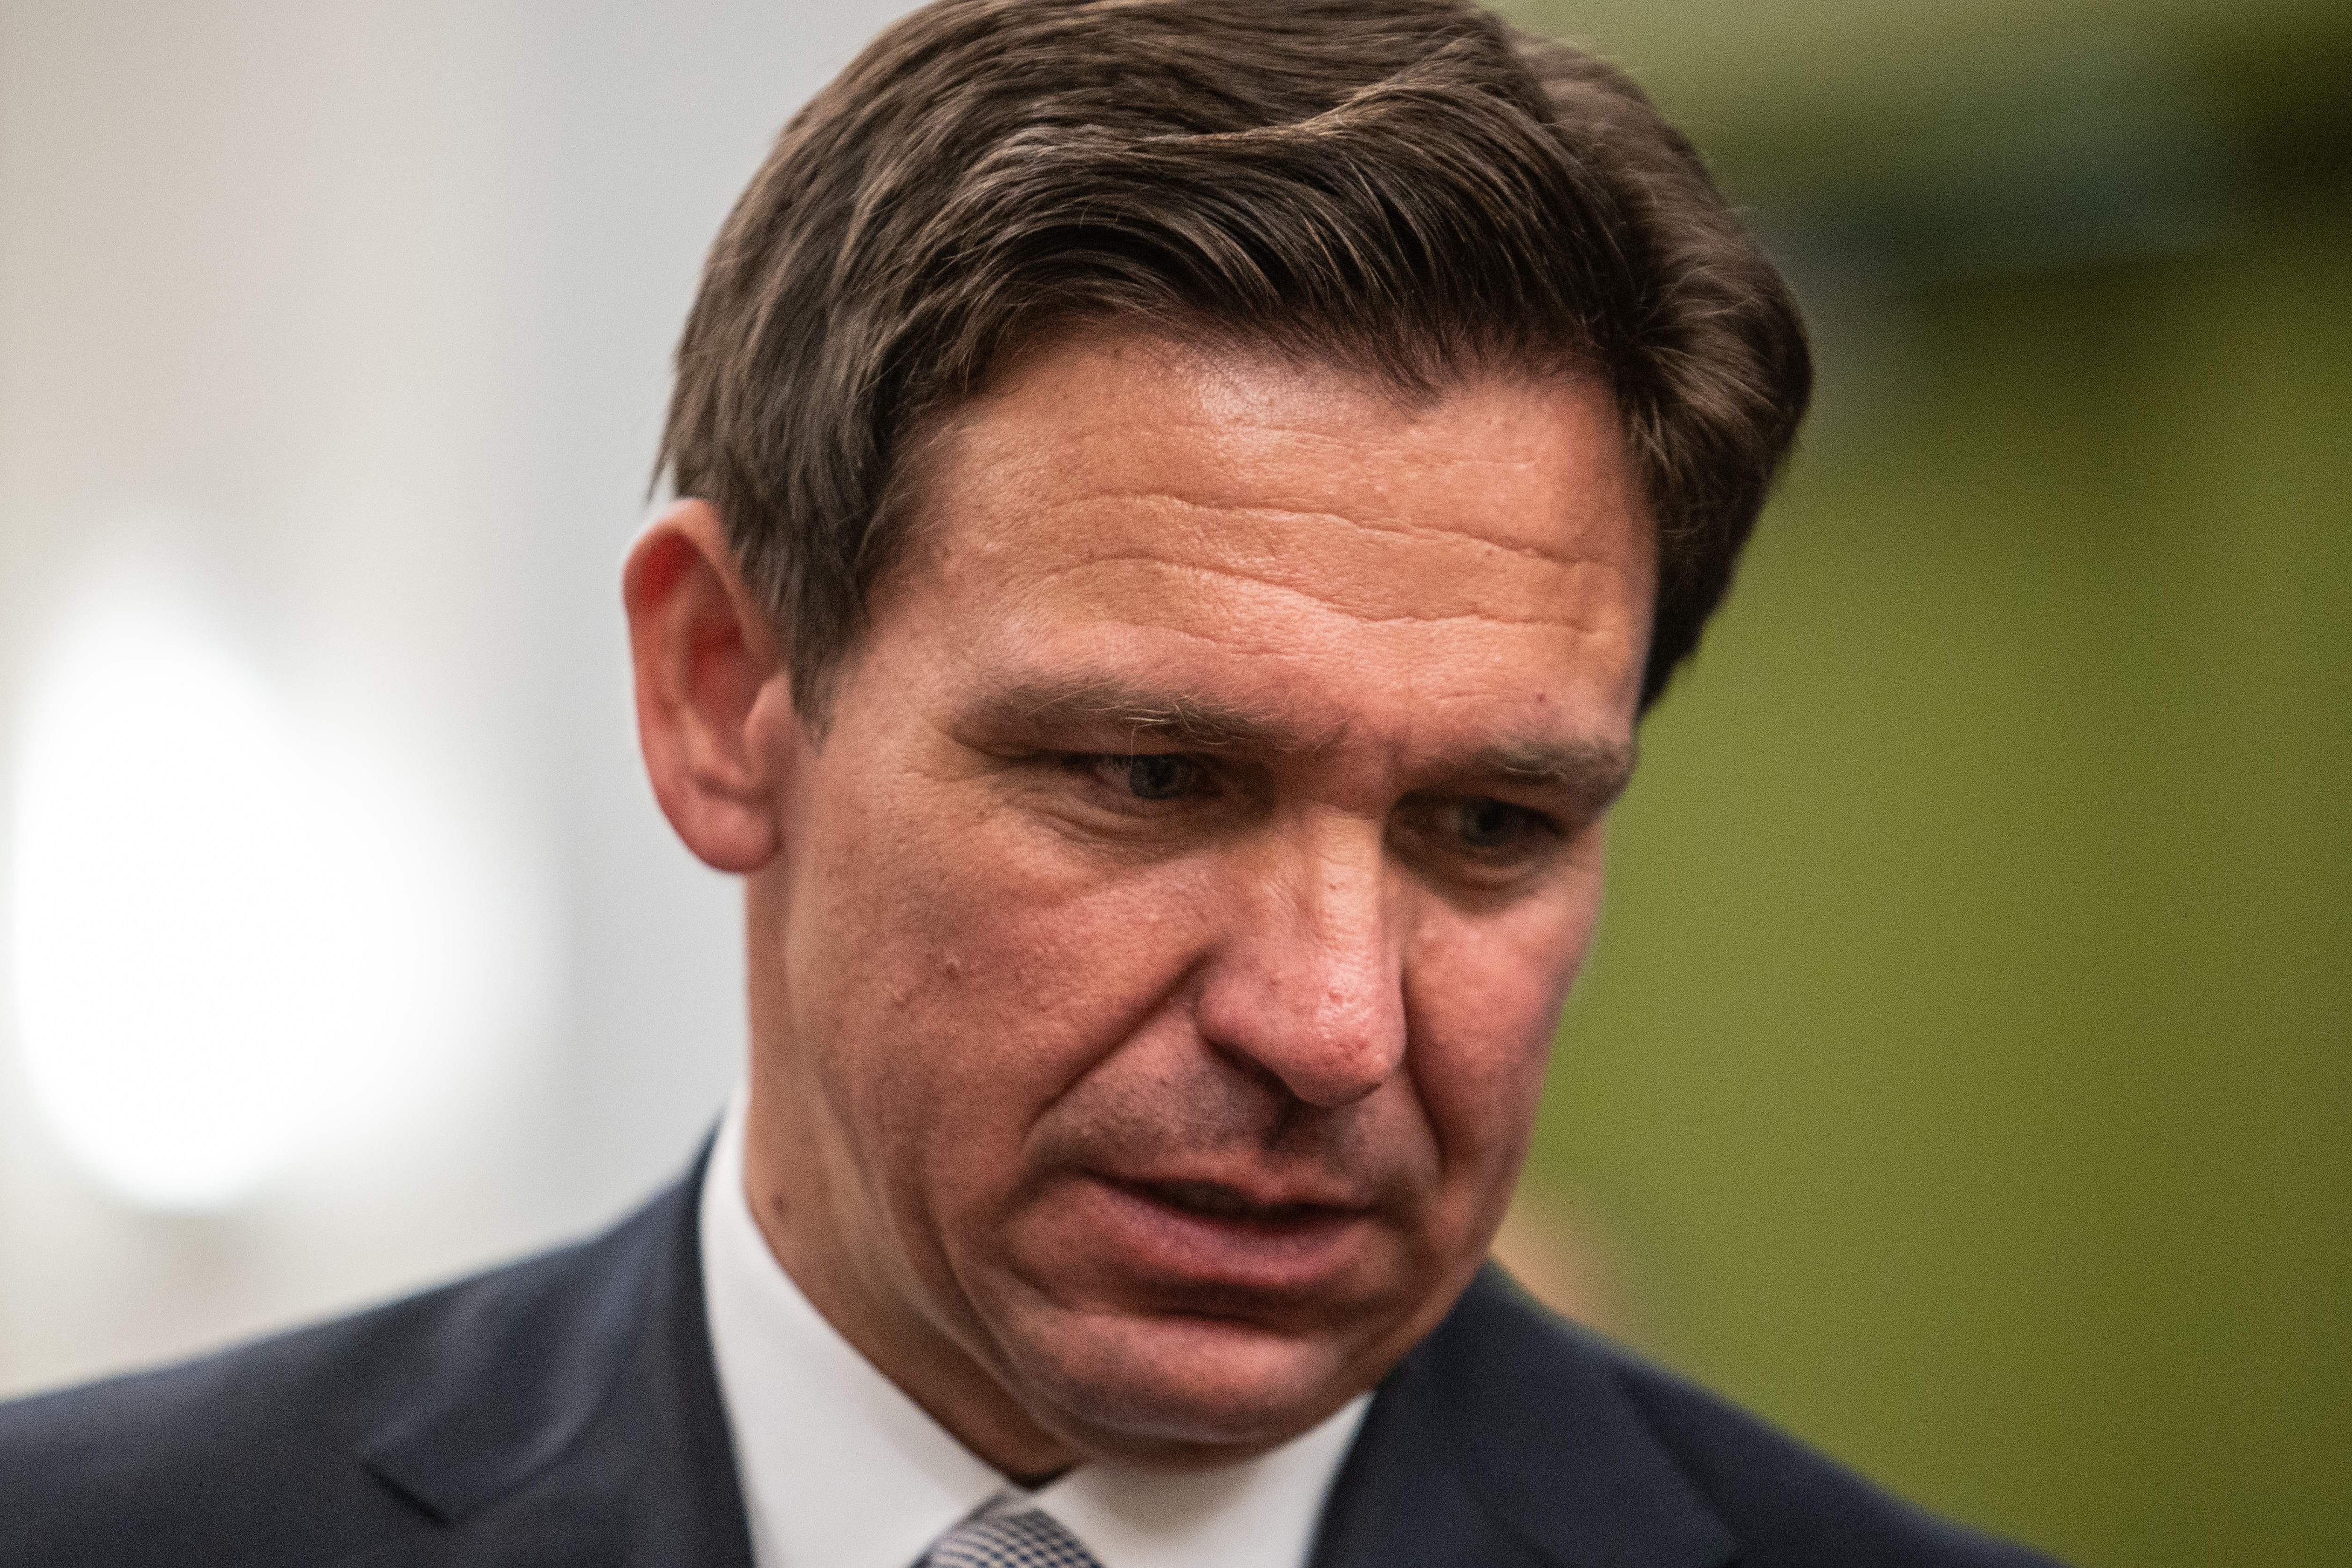 DeSantis Goes Nuclear, Observes That Donald Trump Did Not Win the 2020 Election Ben Mathis-Lilley